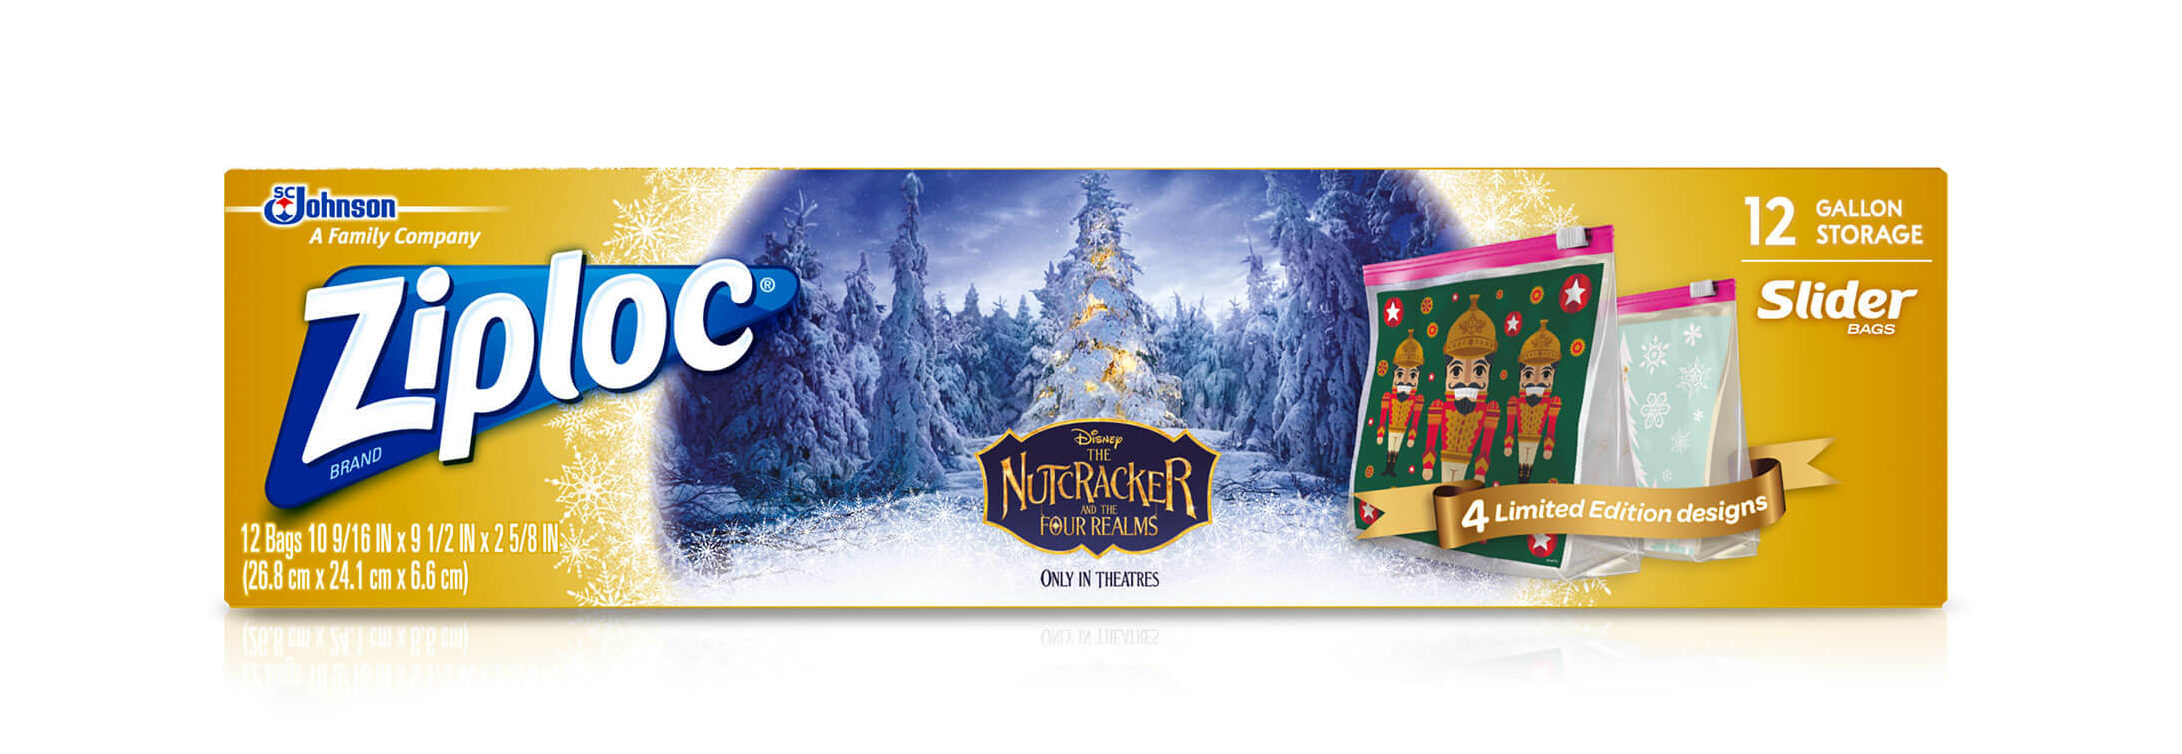 ZIPLOC Brand Freezer Bags Quart Featuring Designs from Disney's The Nutcracker and The Four Realms, 19 Count